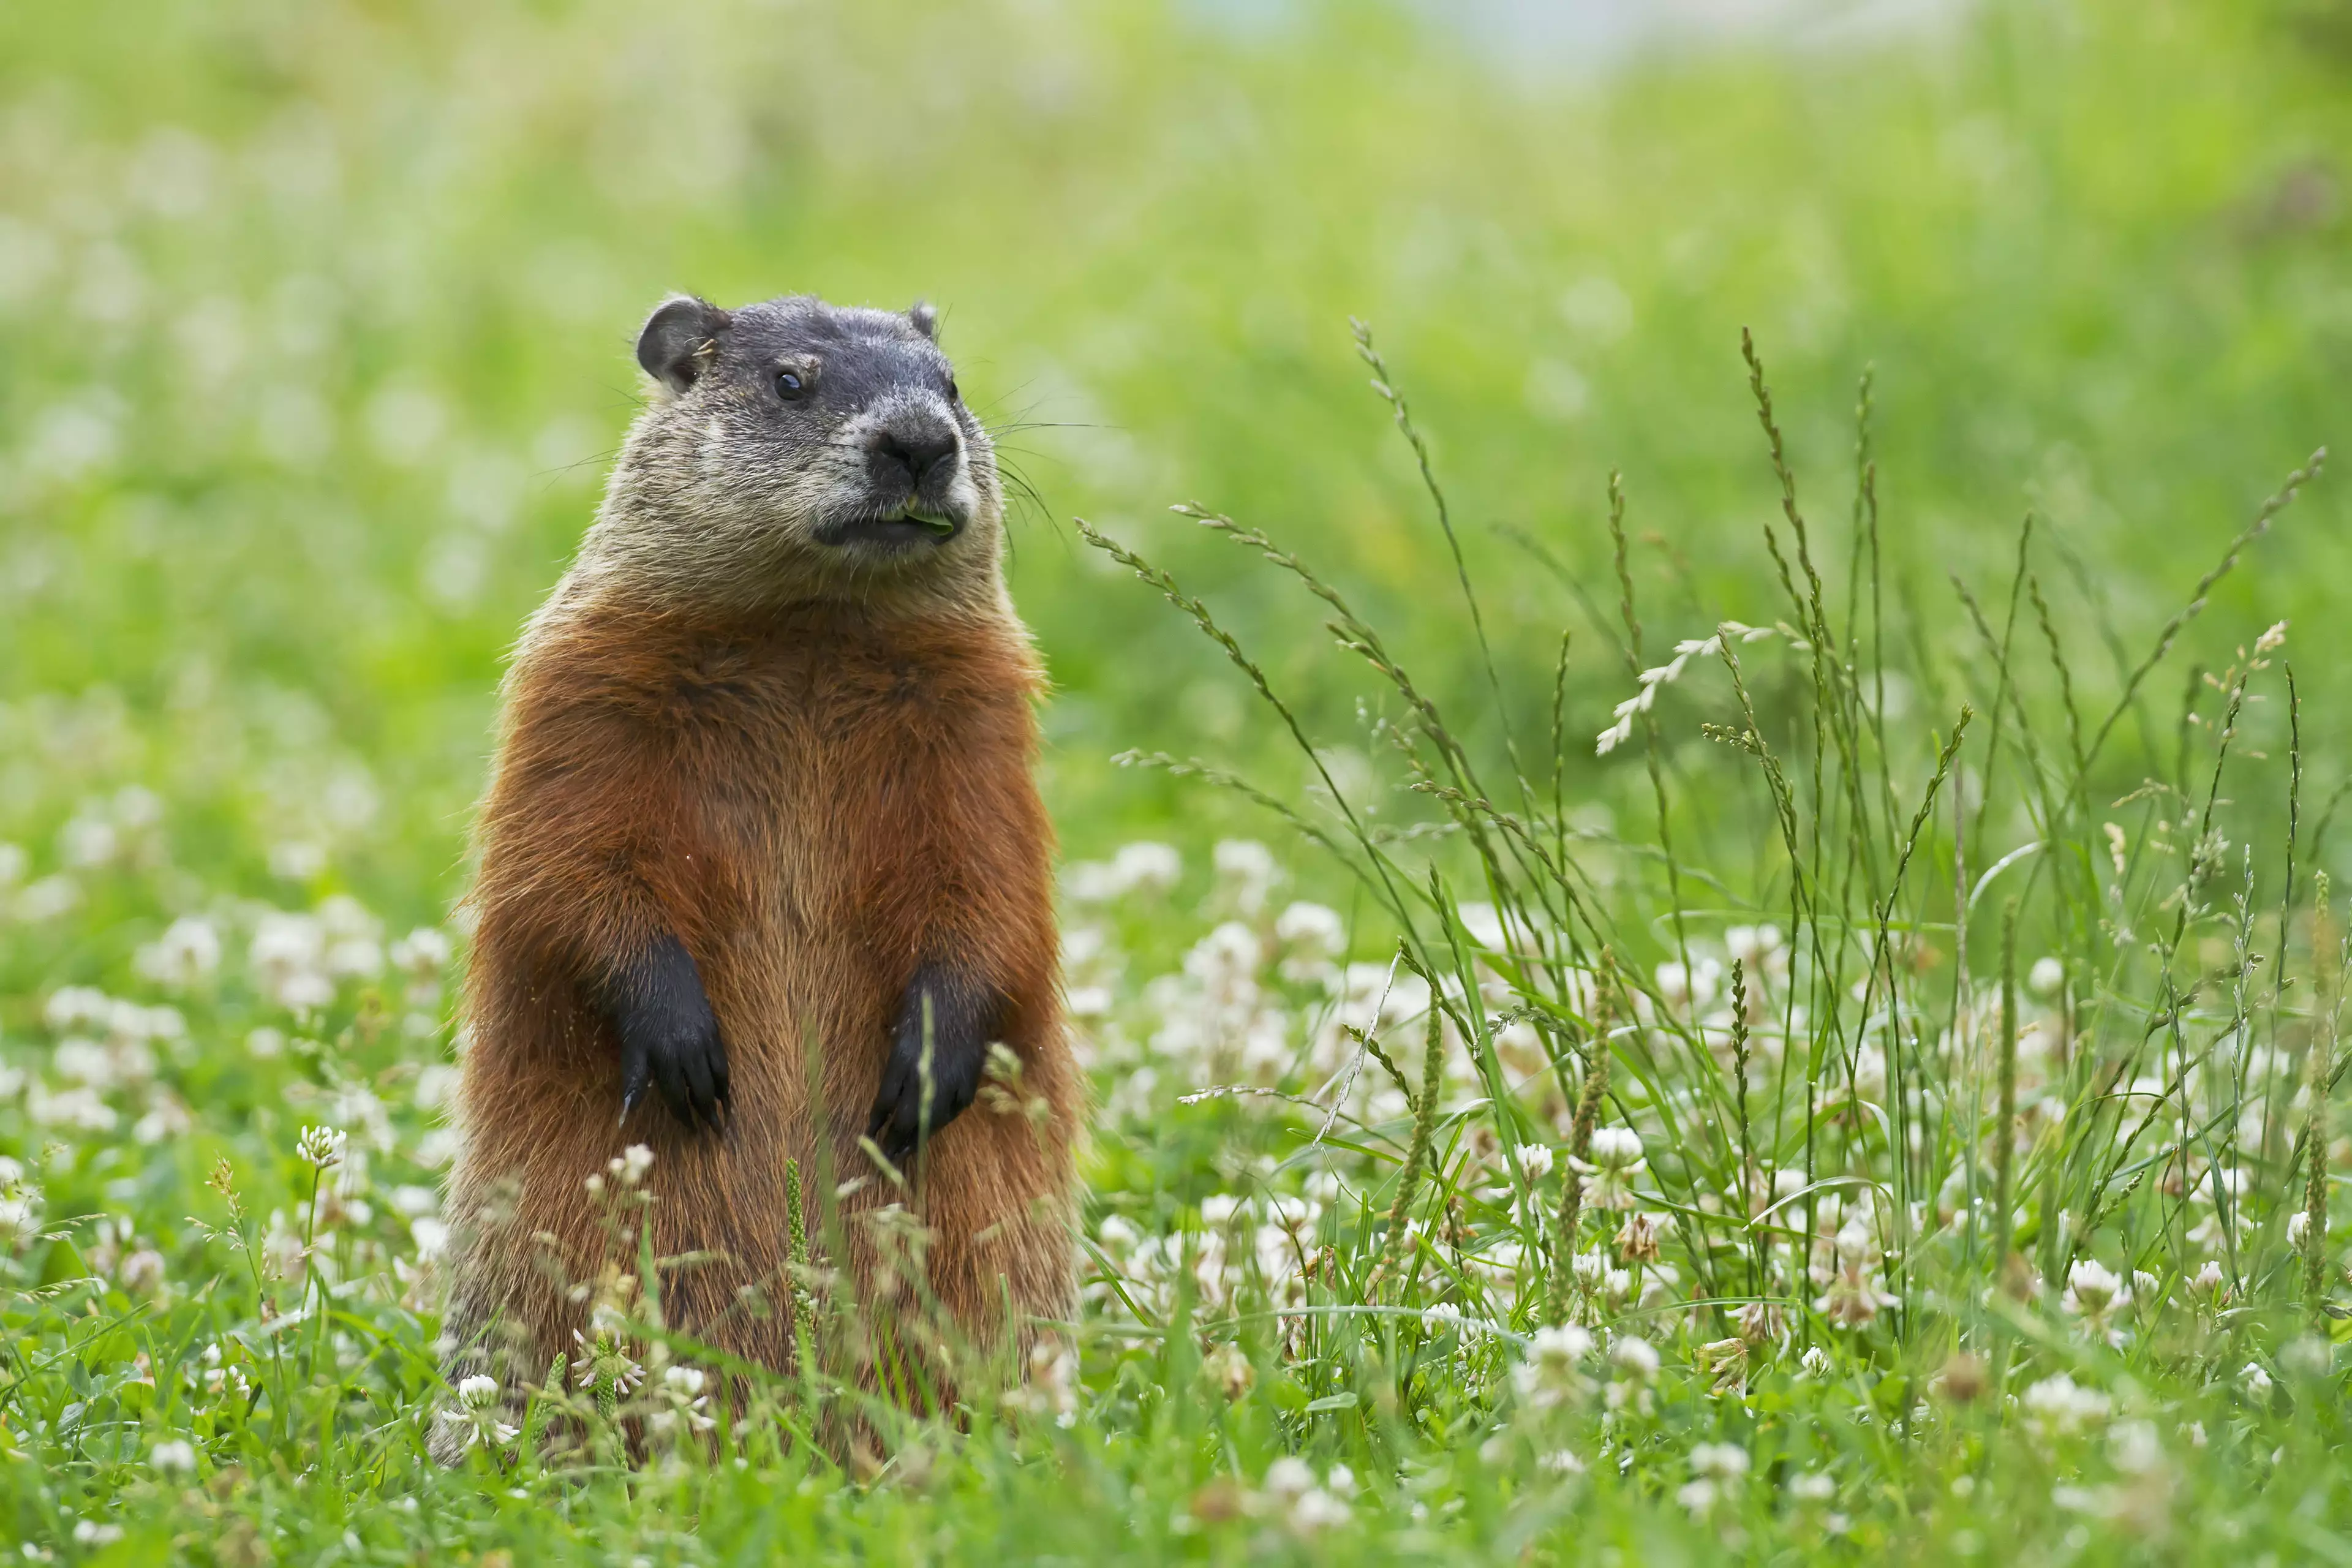 The couple fell ill after reportedly eating contaminated marmot.